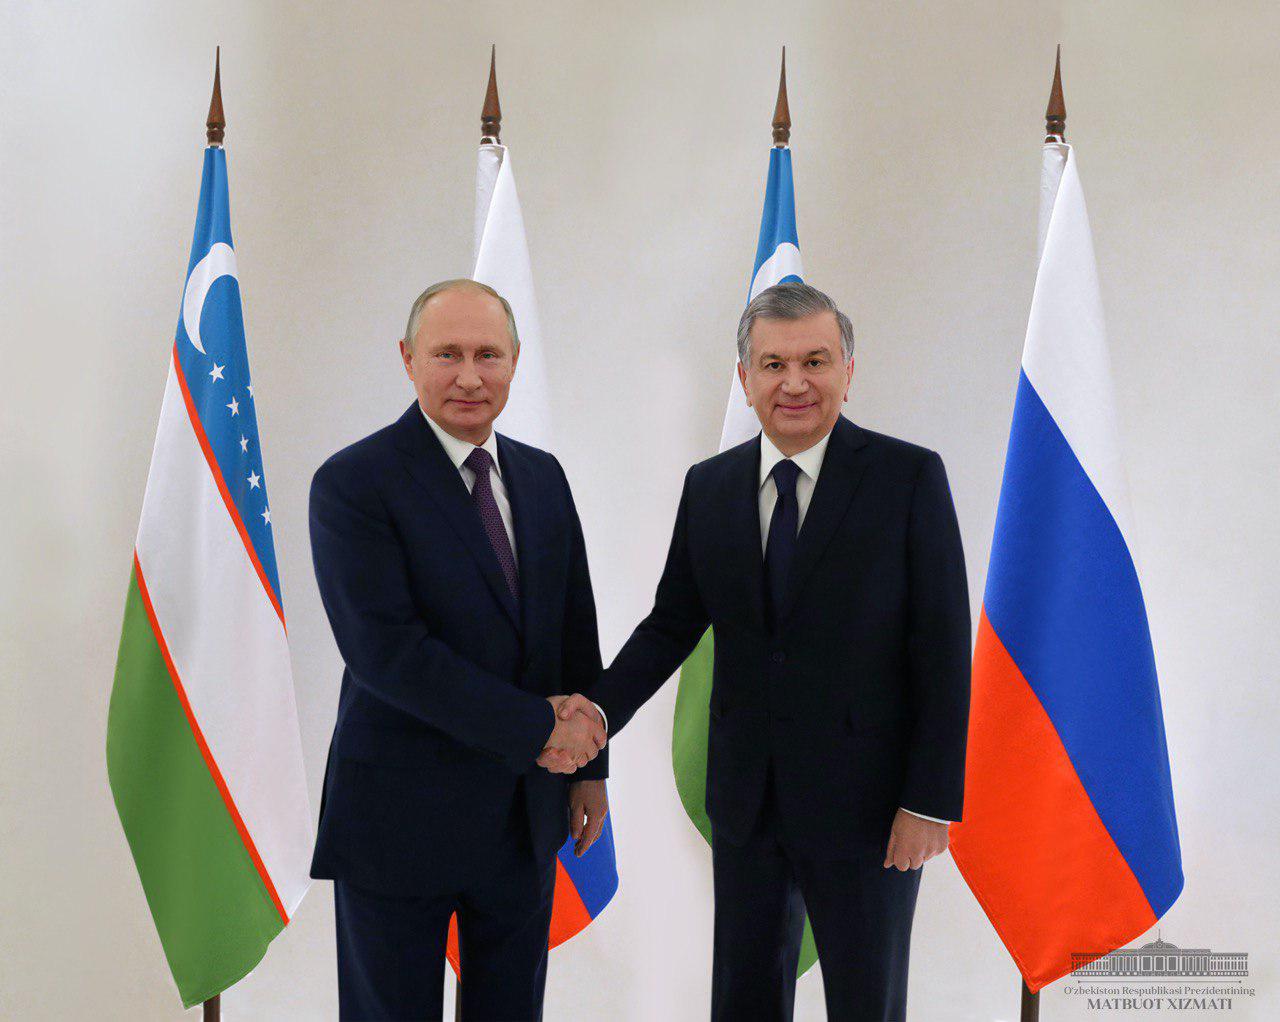 The President attends informal summit of the CIS